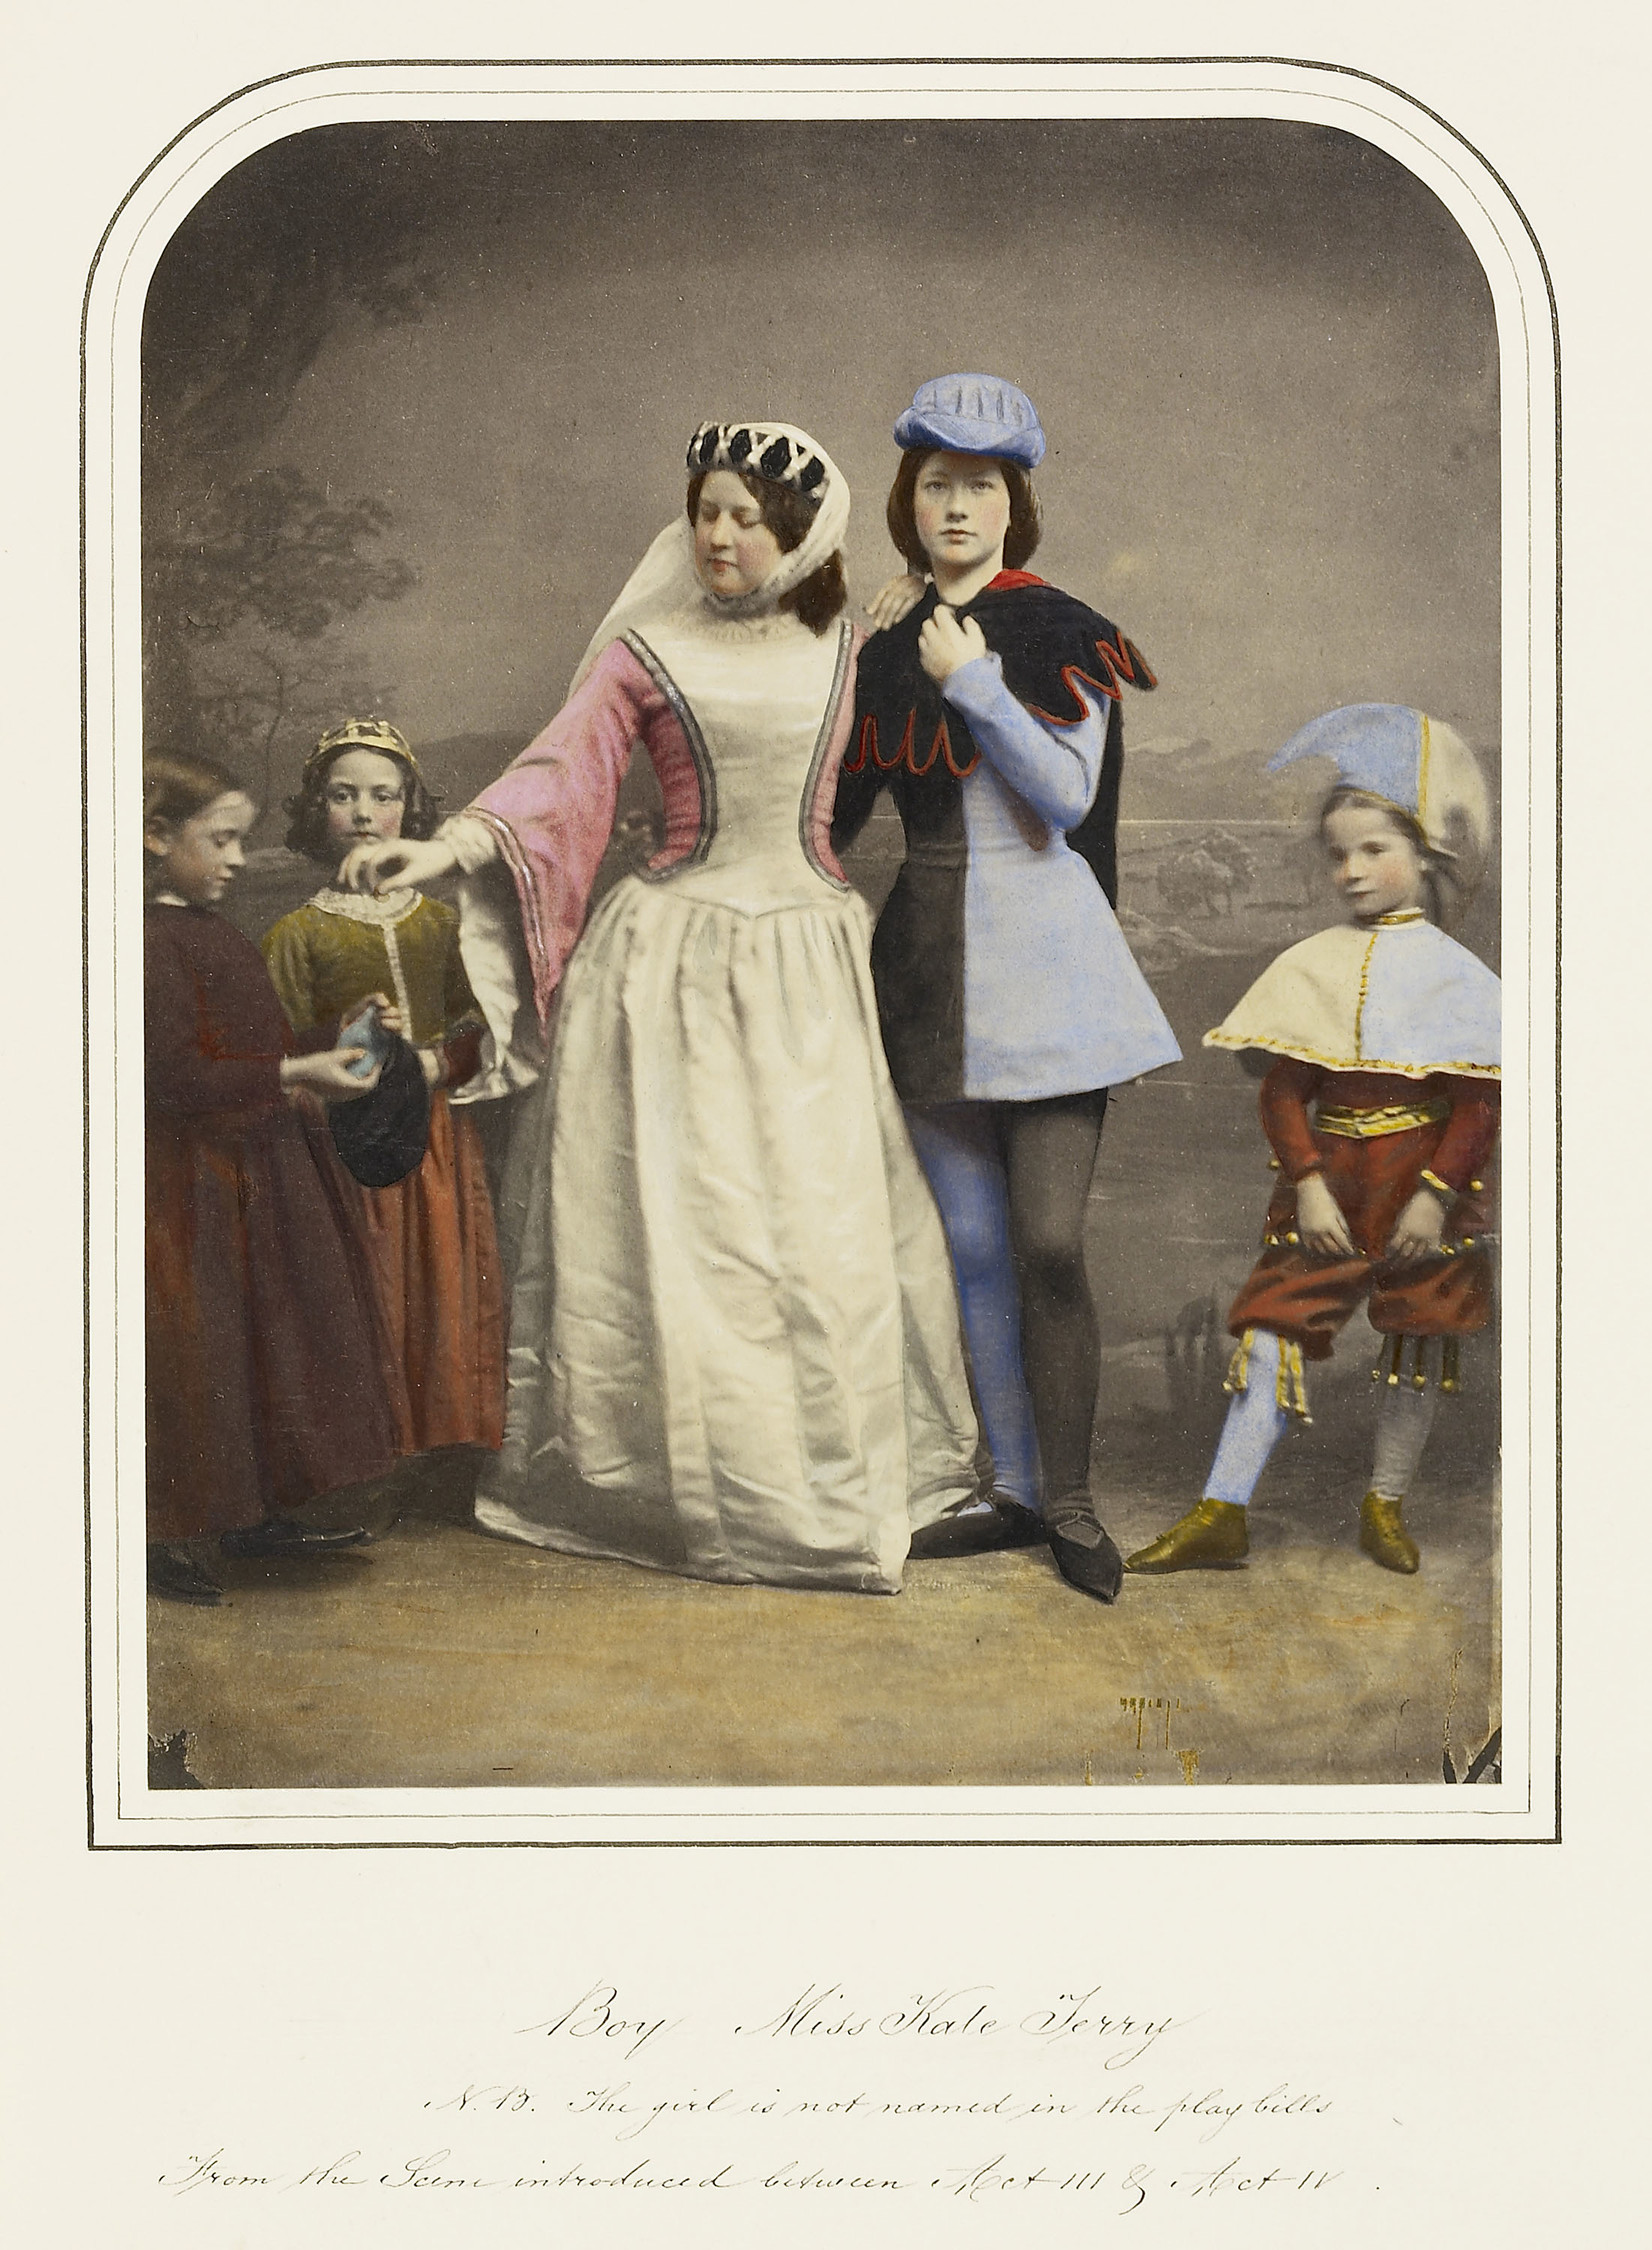 Hand coloured photograph of actress Kate Terry (second from right), as a boy, in a recreation of the 'Historical Episode' of&nbsp;'King Richard II' as performed at the Princess's Theatre, Oxford Street, London.&nbsp;Terry wears a black and light blue shor